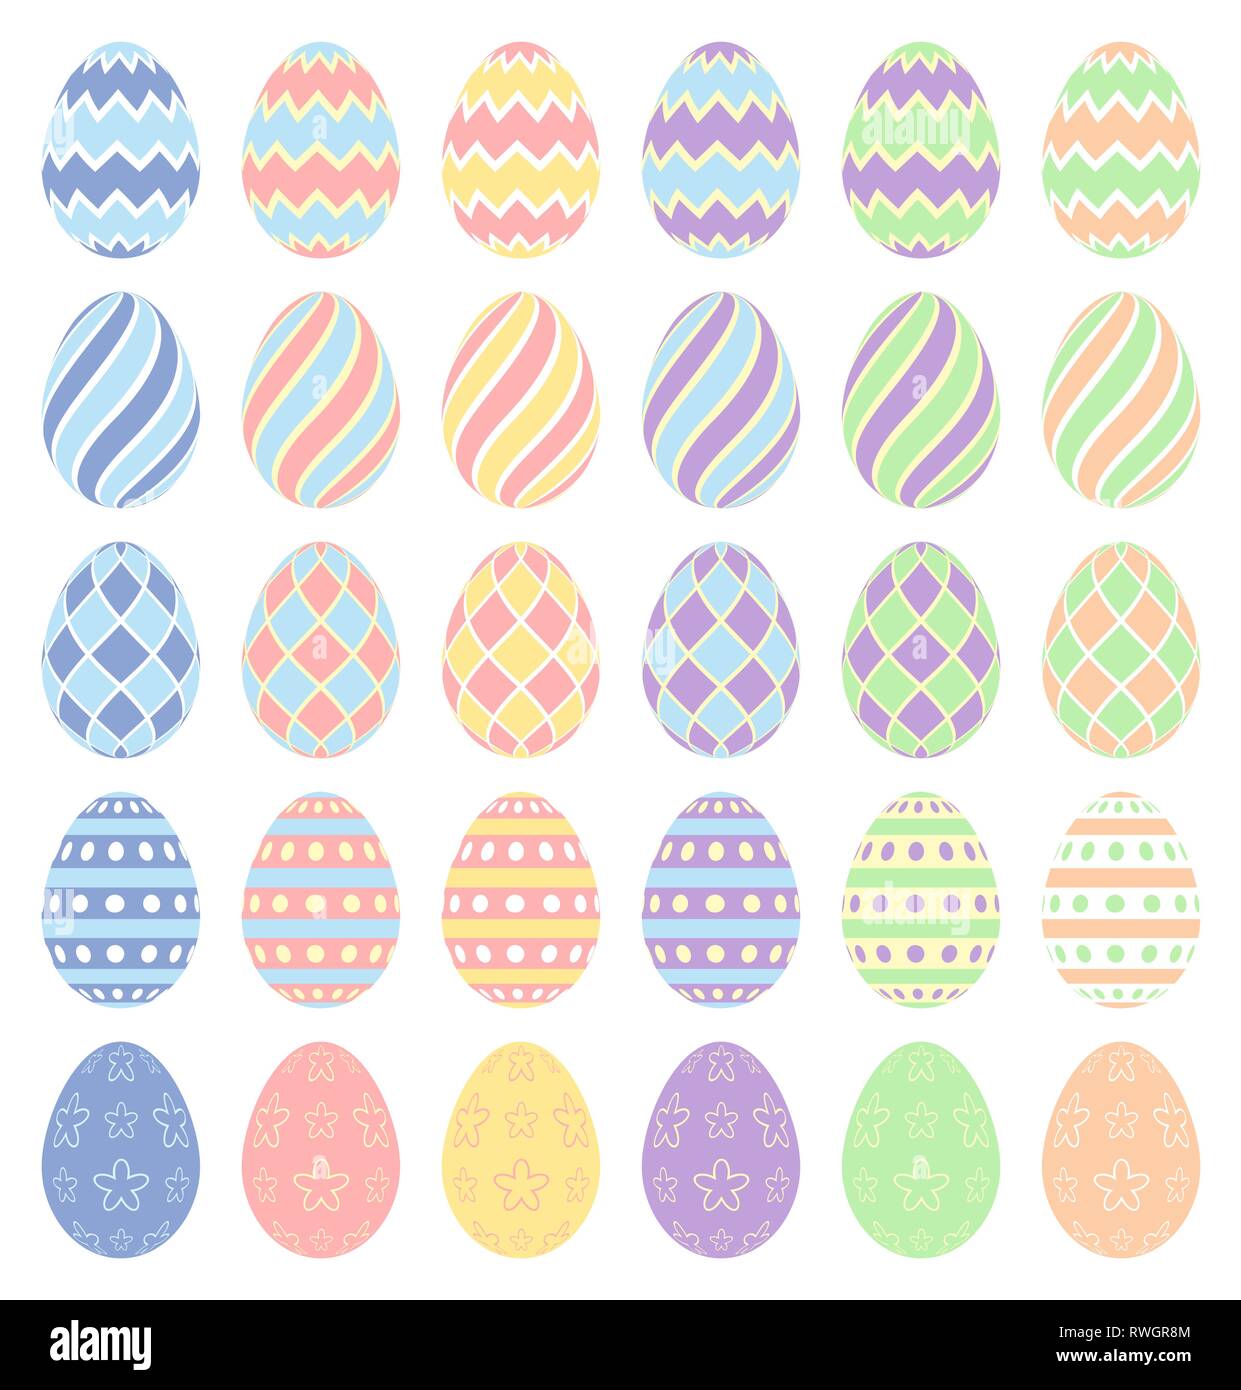 Pastel color vector illustration of Easter eggs on a white background. Stock Vector